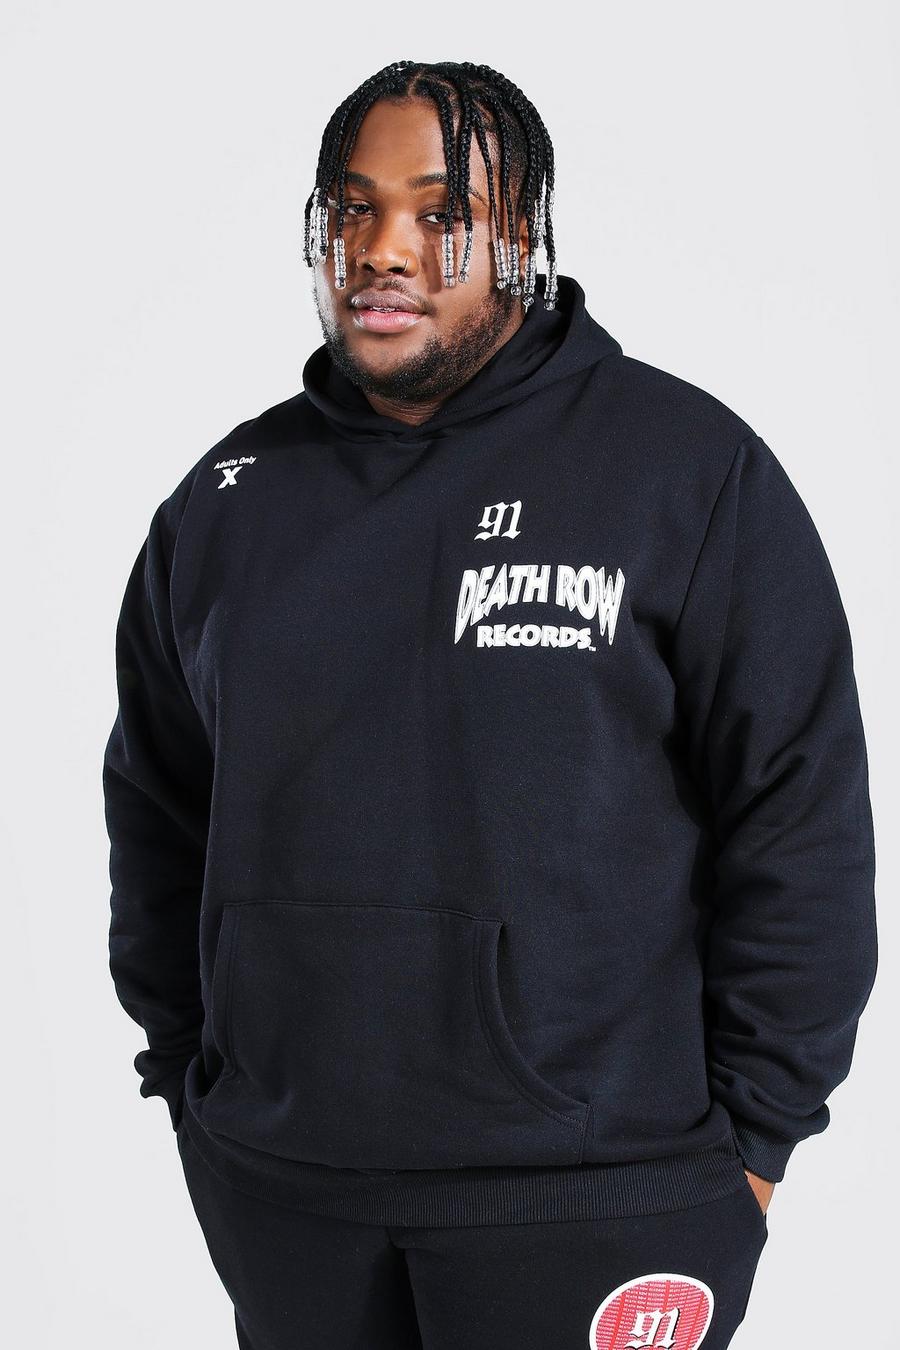 Black Plus size - "Death Row 91" Hoodie med officiellt tryck image number 1